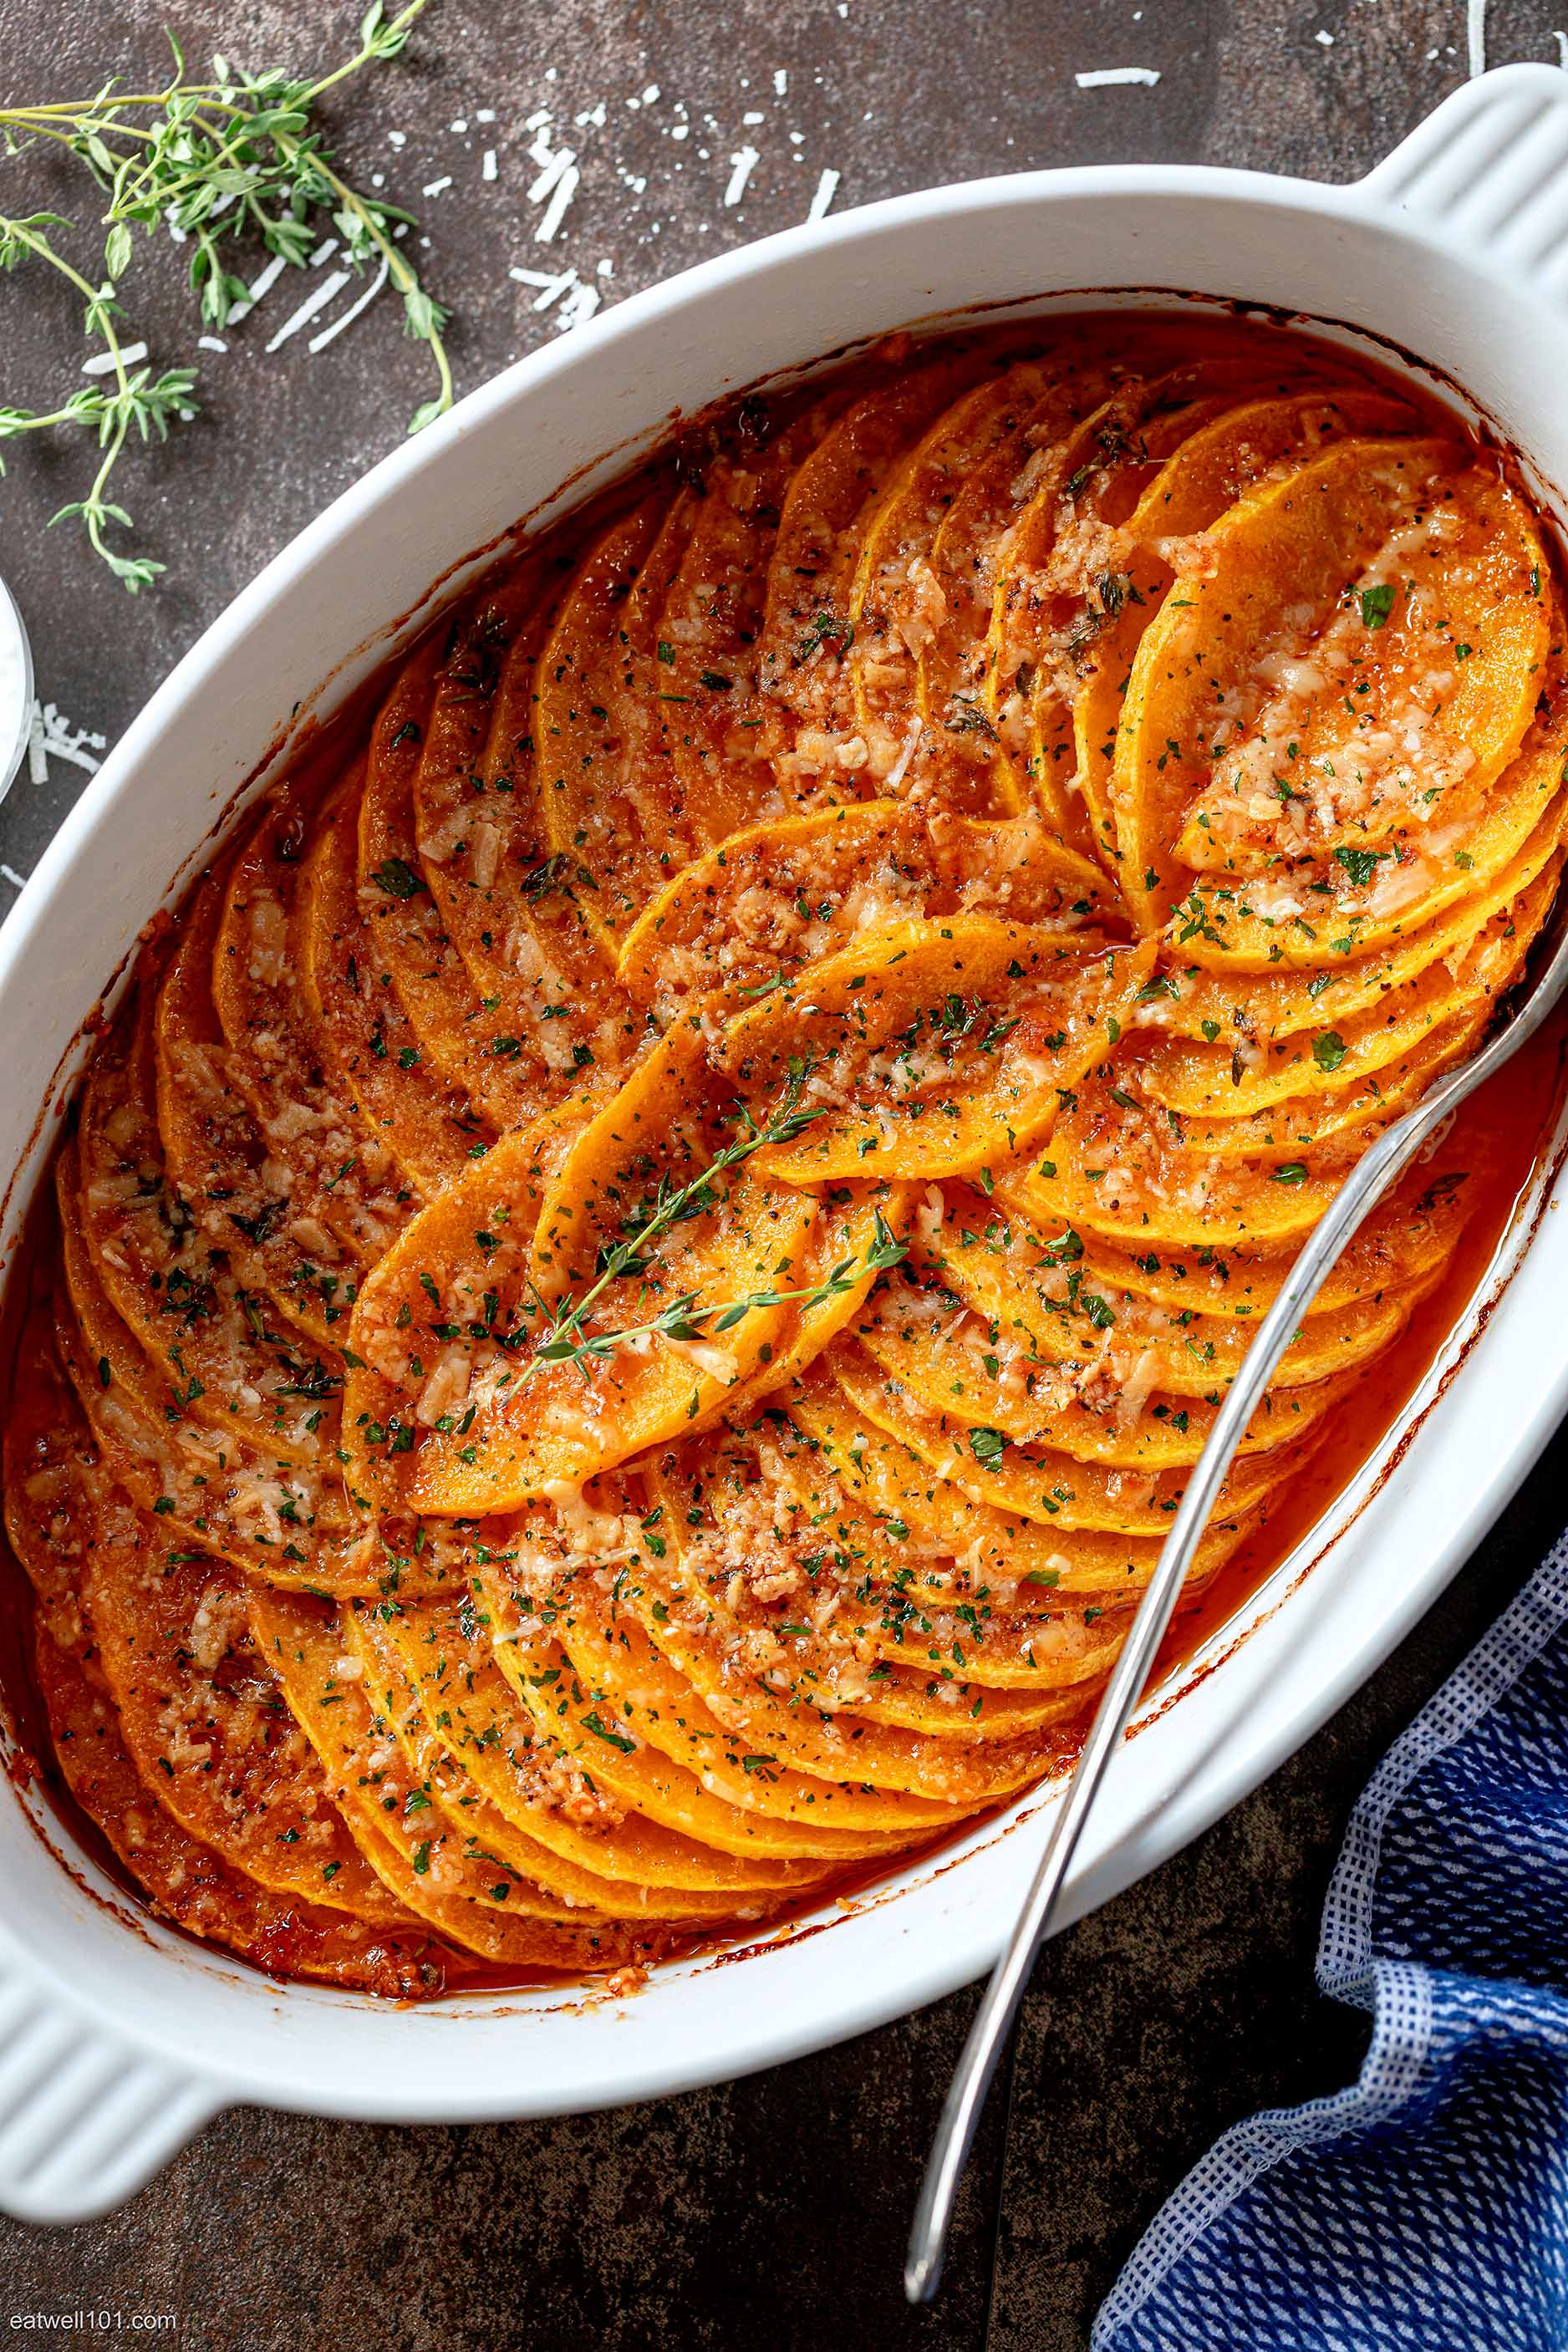 4- Ingredient Oven-Roasted Butternut Squash - Healthy Fitness Meals